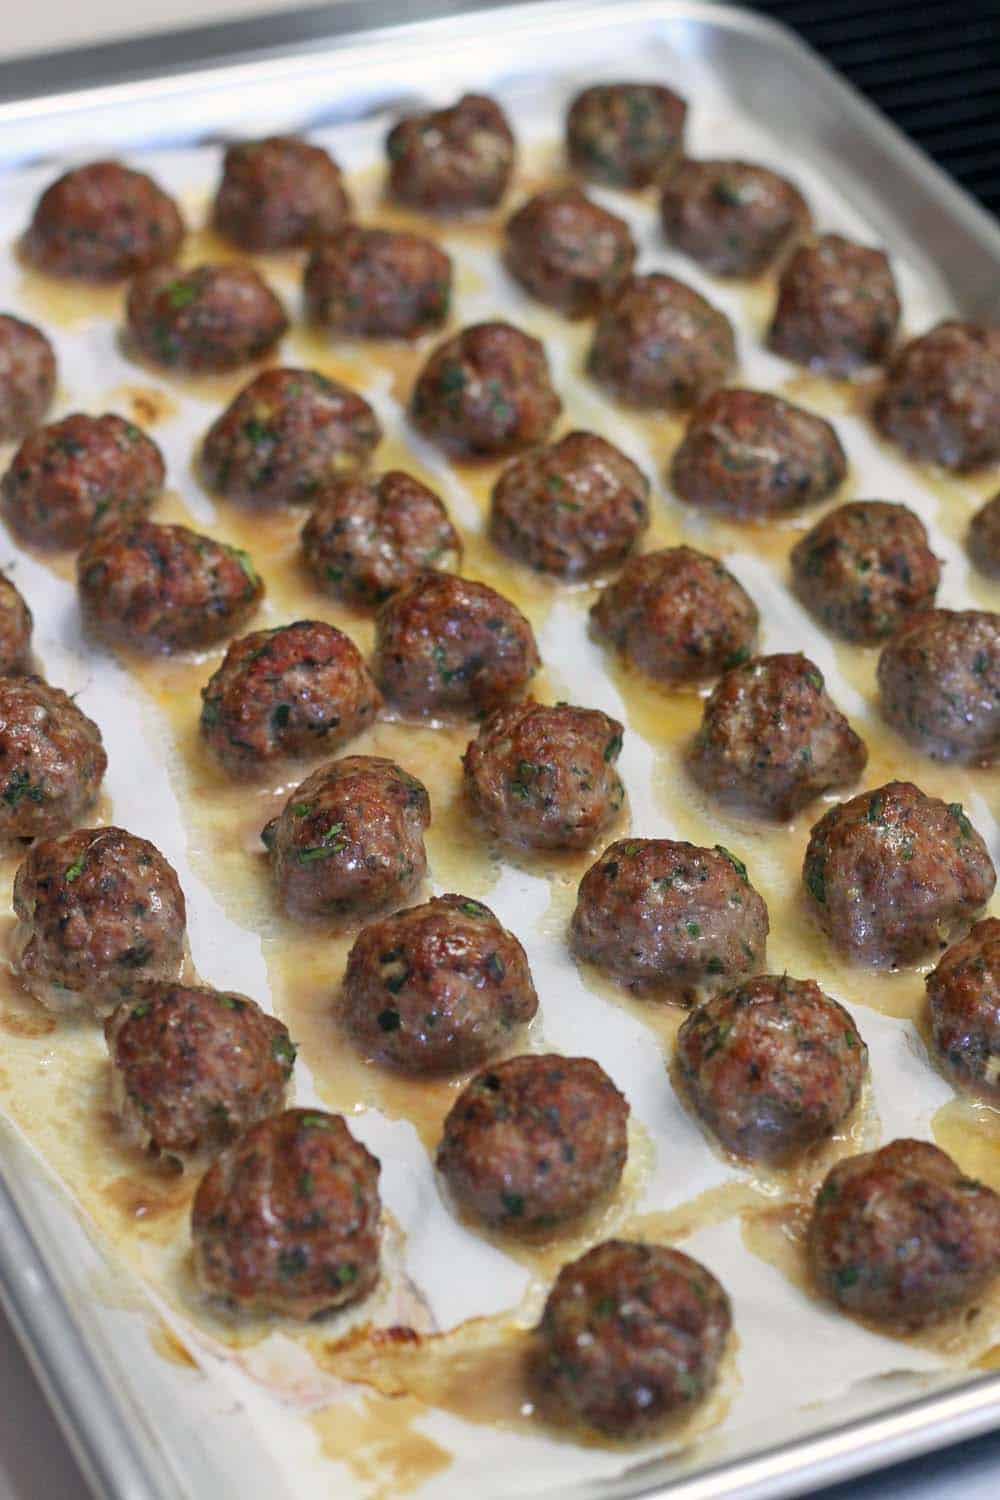 This Paleo/Whole30 baked version of Greek Meatballs (Keftedes) are paired with a super easy Romesco Sauce. The PERFECT make-ahead appetizer for your next party!